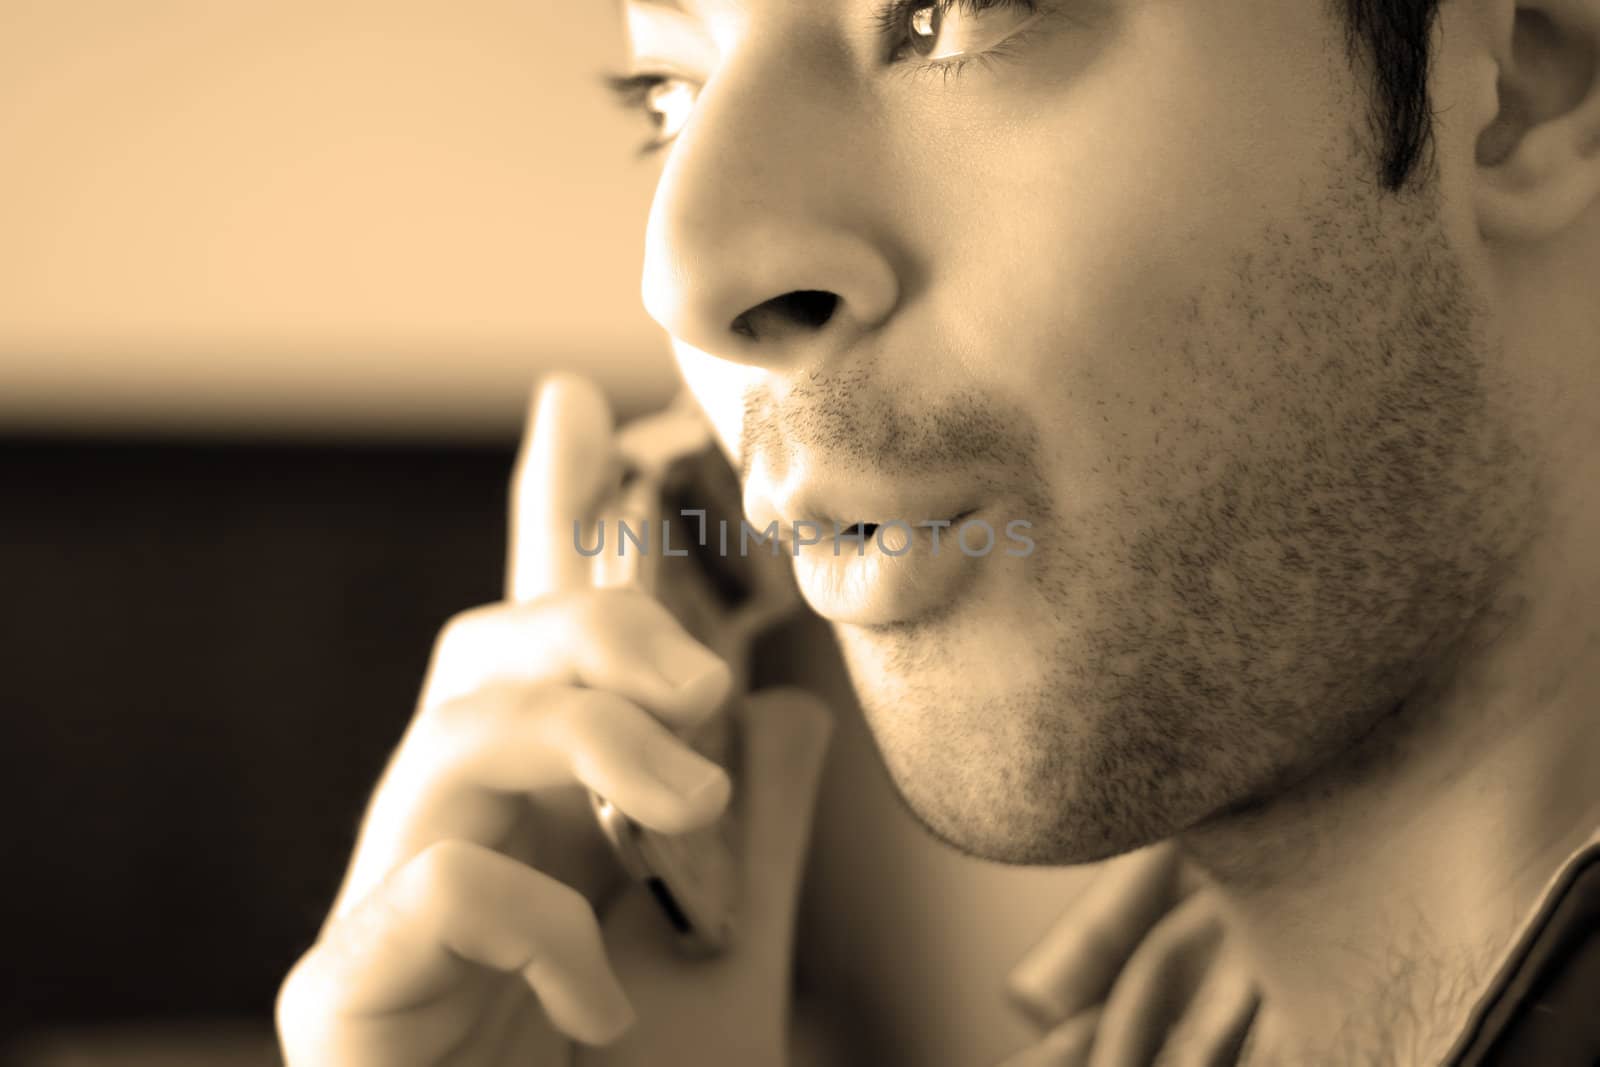 Sepia toned portrait of a young man on his celly phone - he looks surprised from what he has just heard.